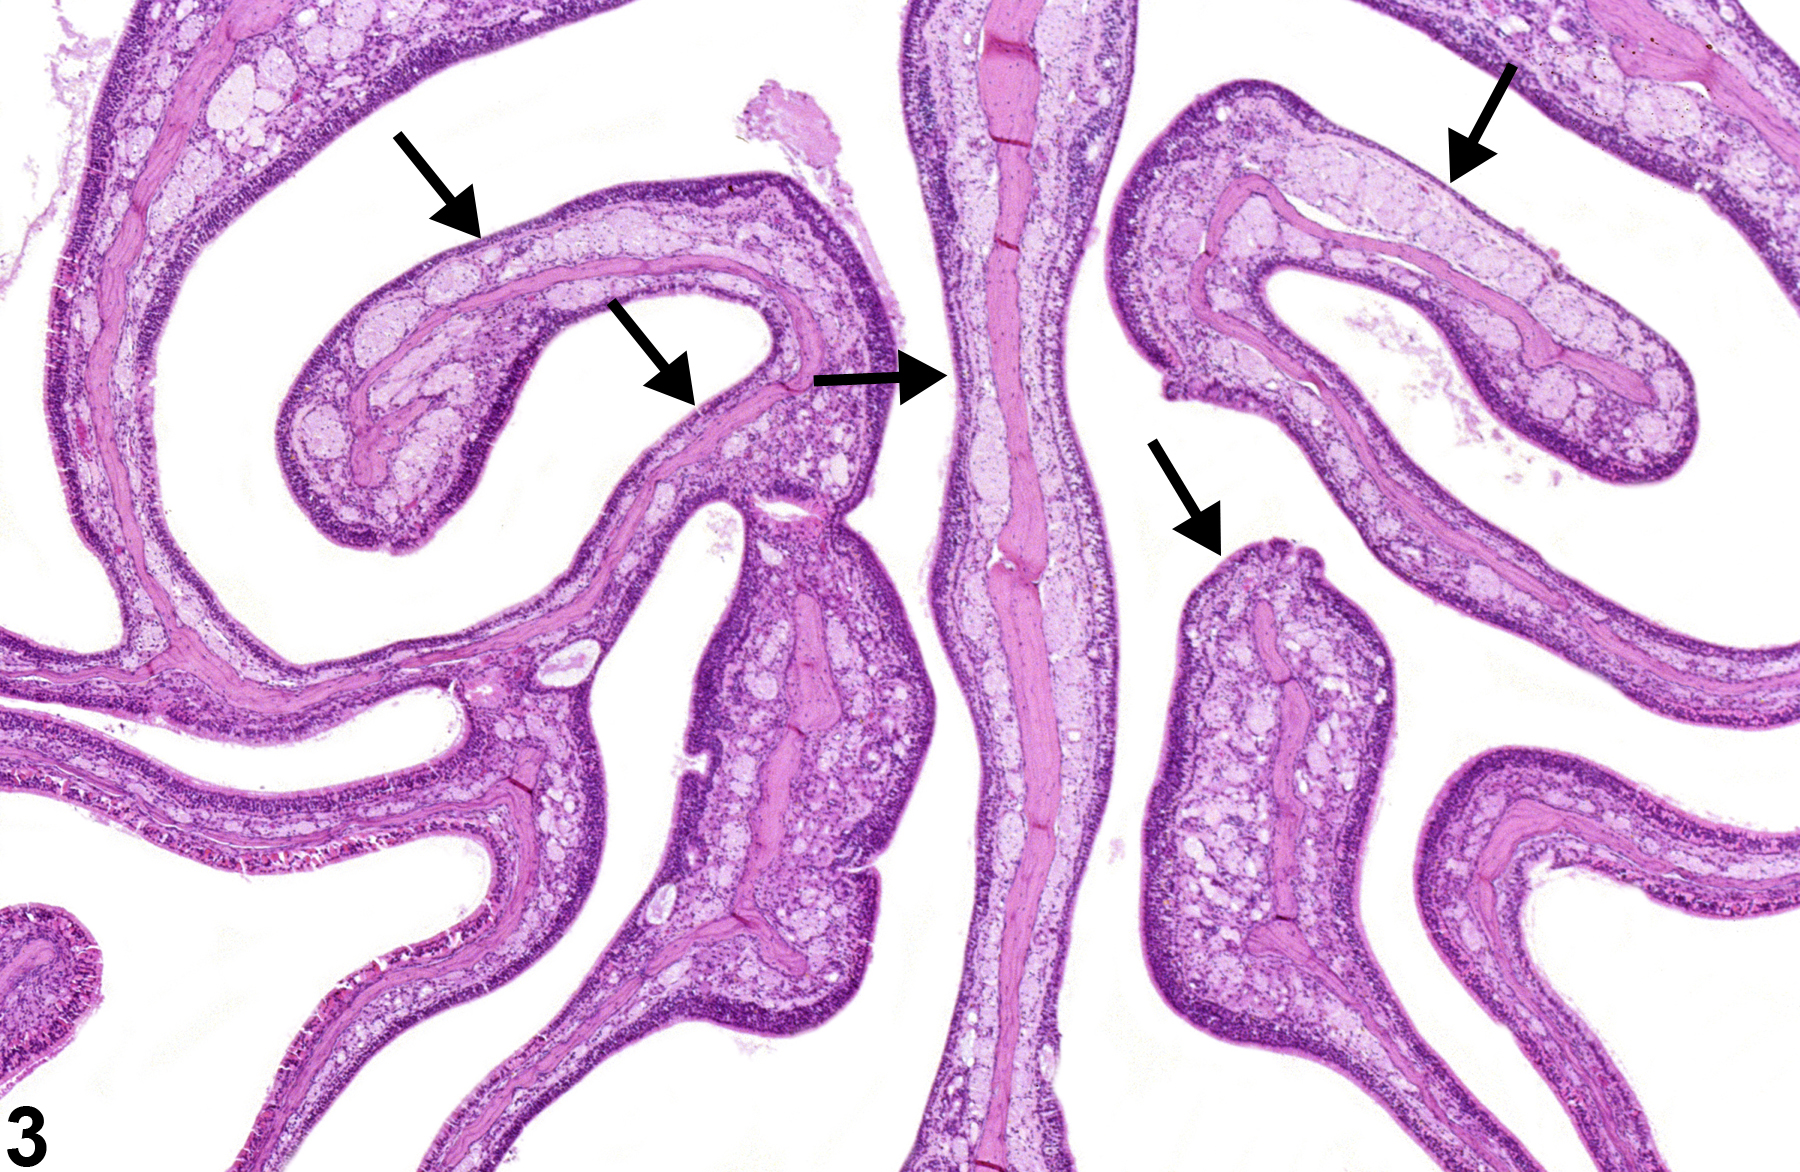 Image of atrophy in the nose, olfactory epithelium from a male F344/N rat in a chronic study